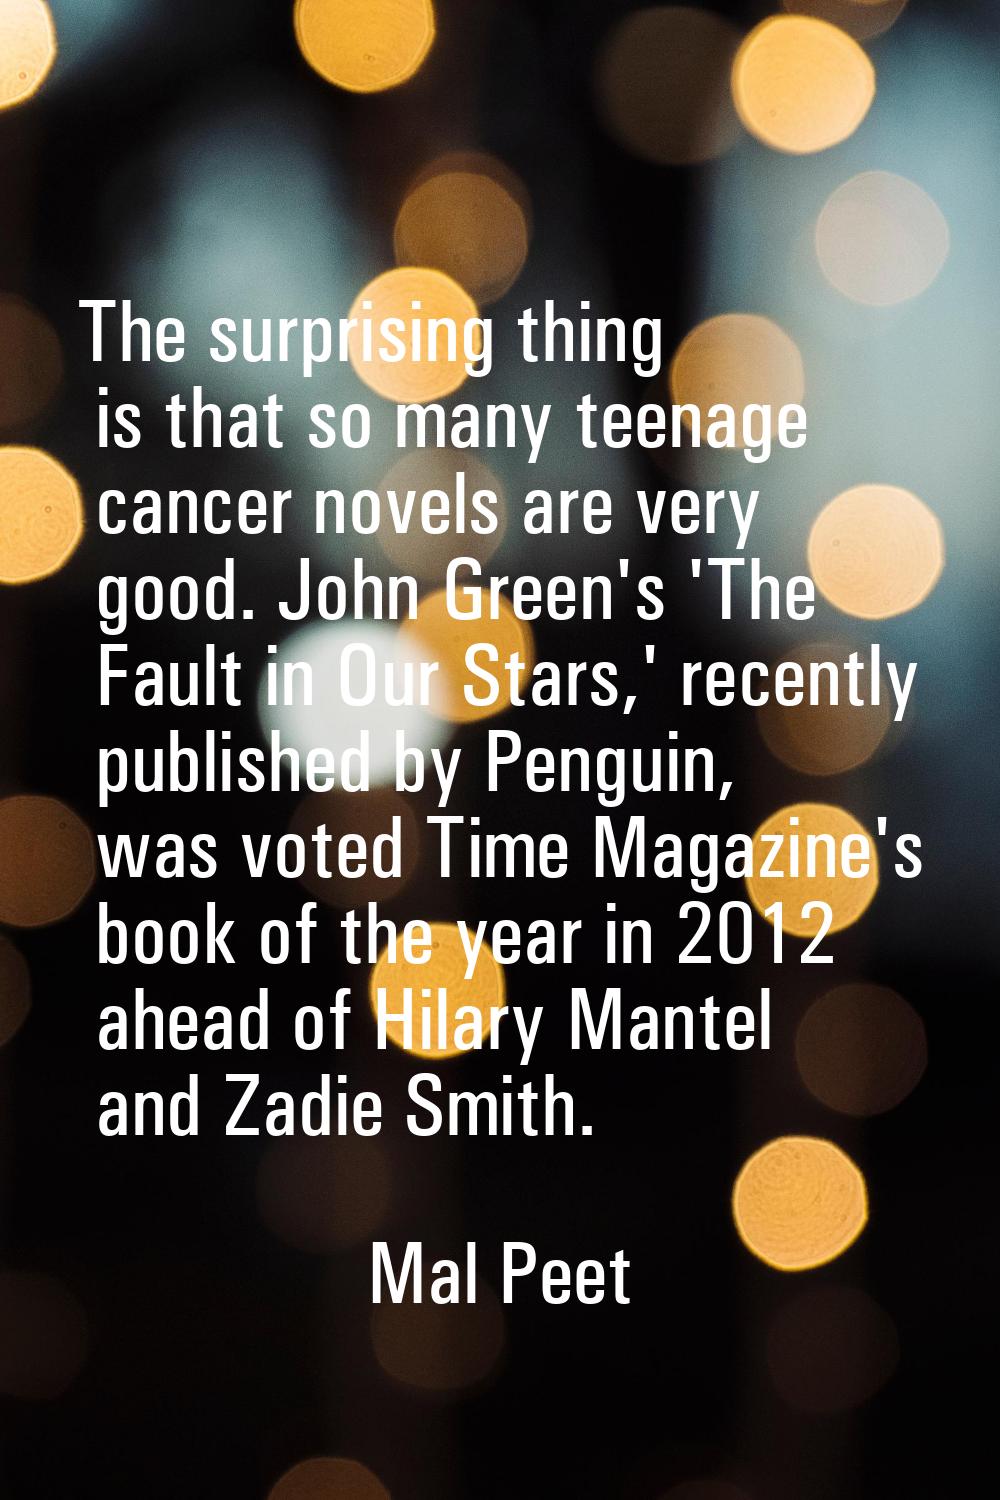 The surprising thing is that so many teenage cancer novels are very good. John Green's 'The Fault i